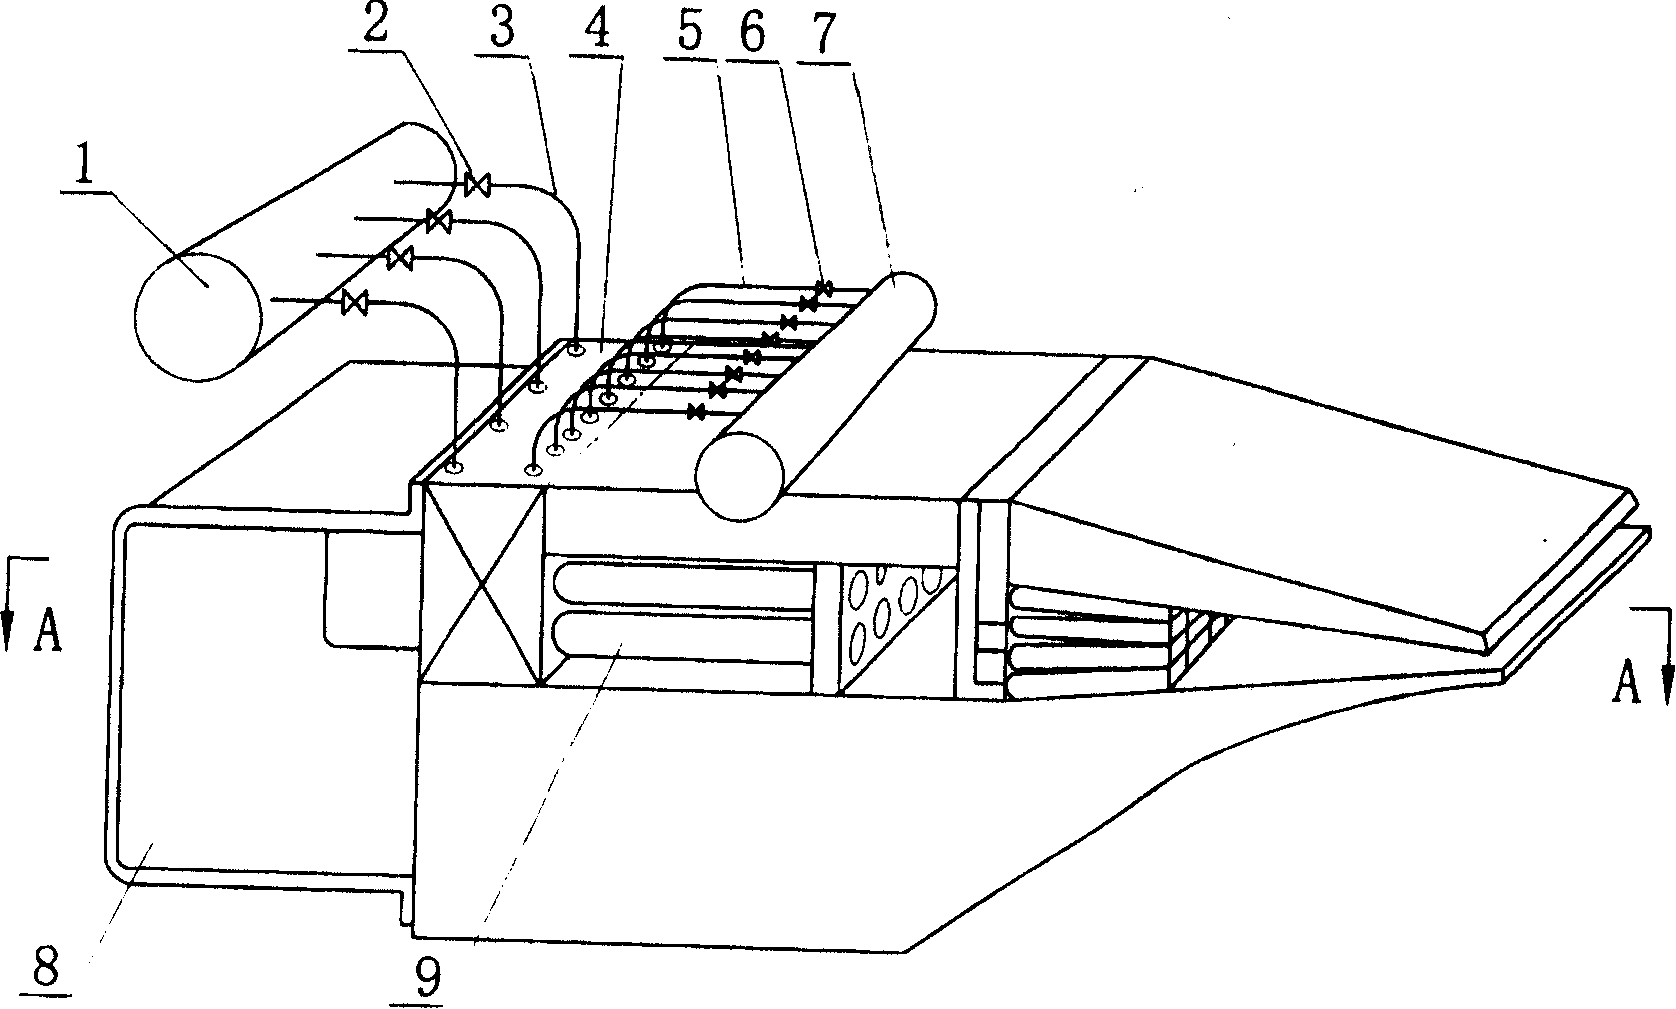 Device for roughly regulating or fine adjustment for paper banner through adding diluent water